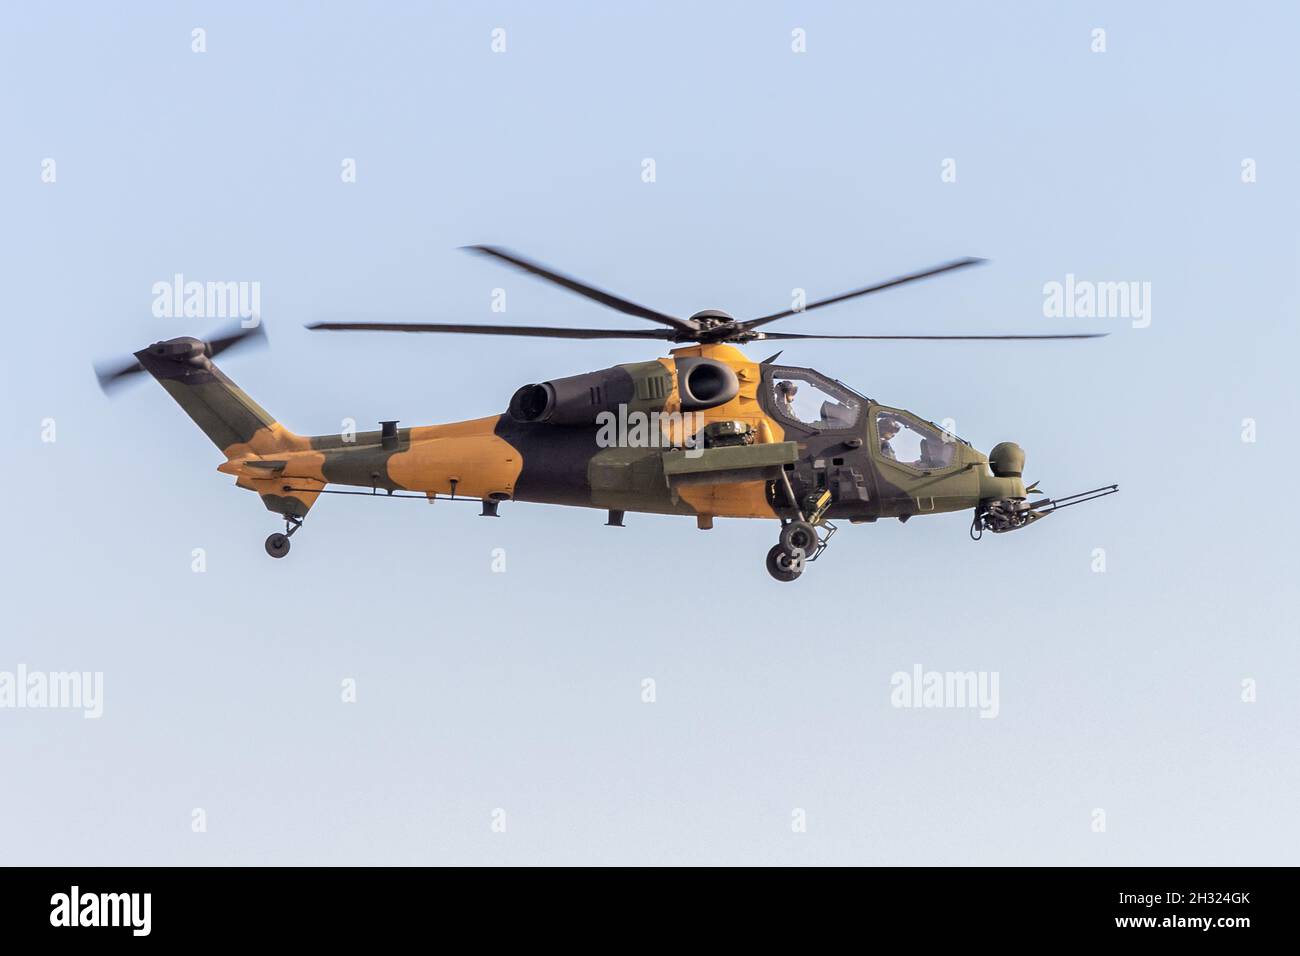 Military combat helicopter in flight Stock Photo